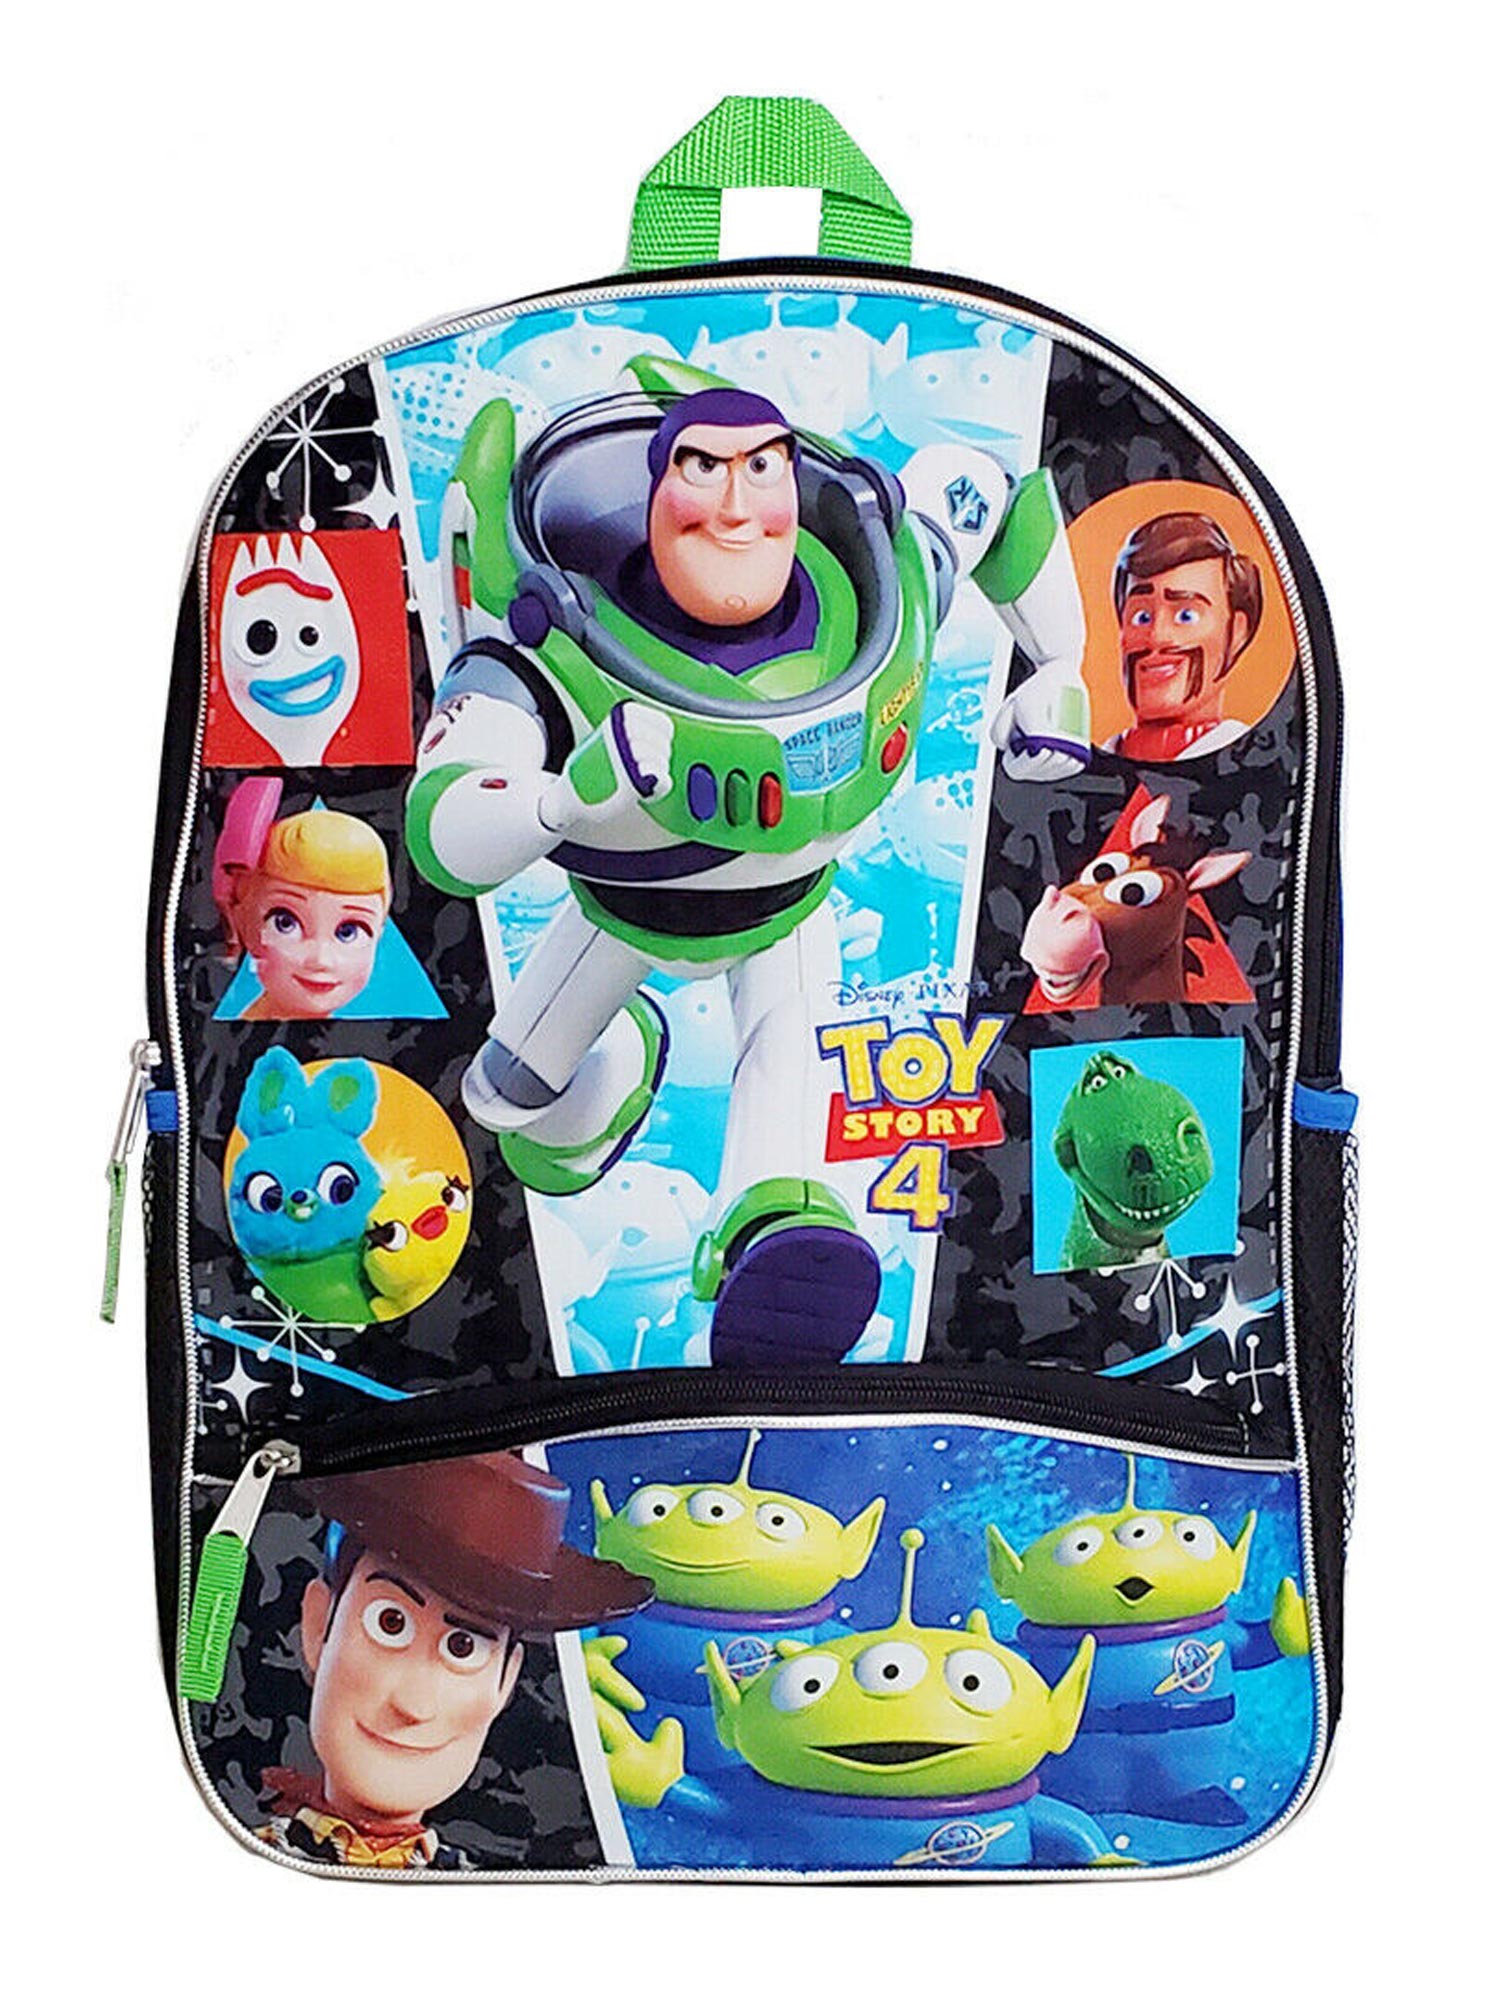 Boys Disney Pixar Toy Story 4 Backpack Woody Buzz Ducky Bunny Forky and More! - image 1 of 4